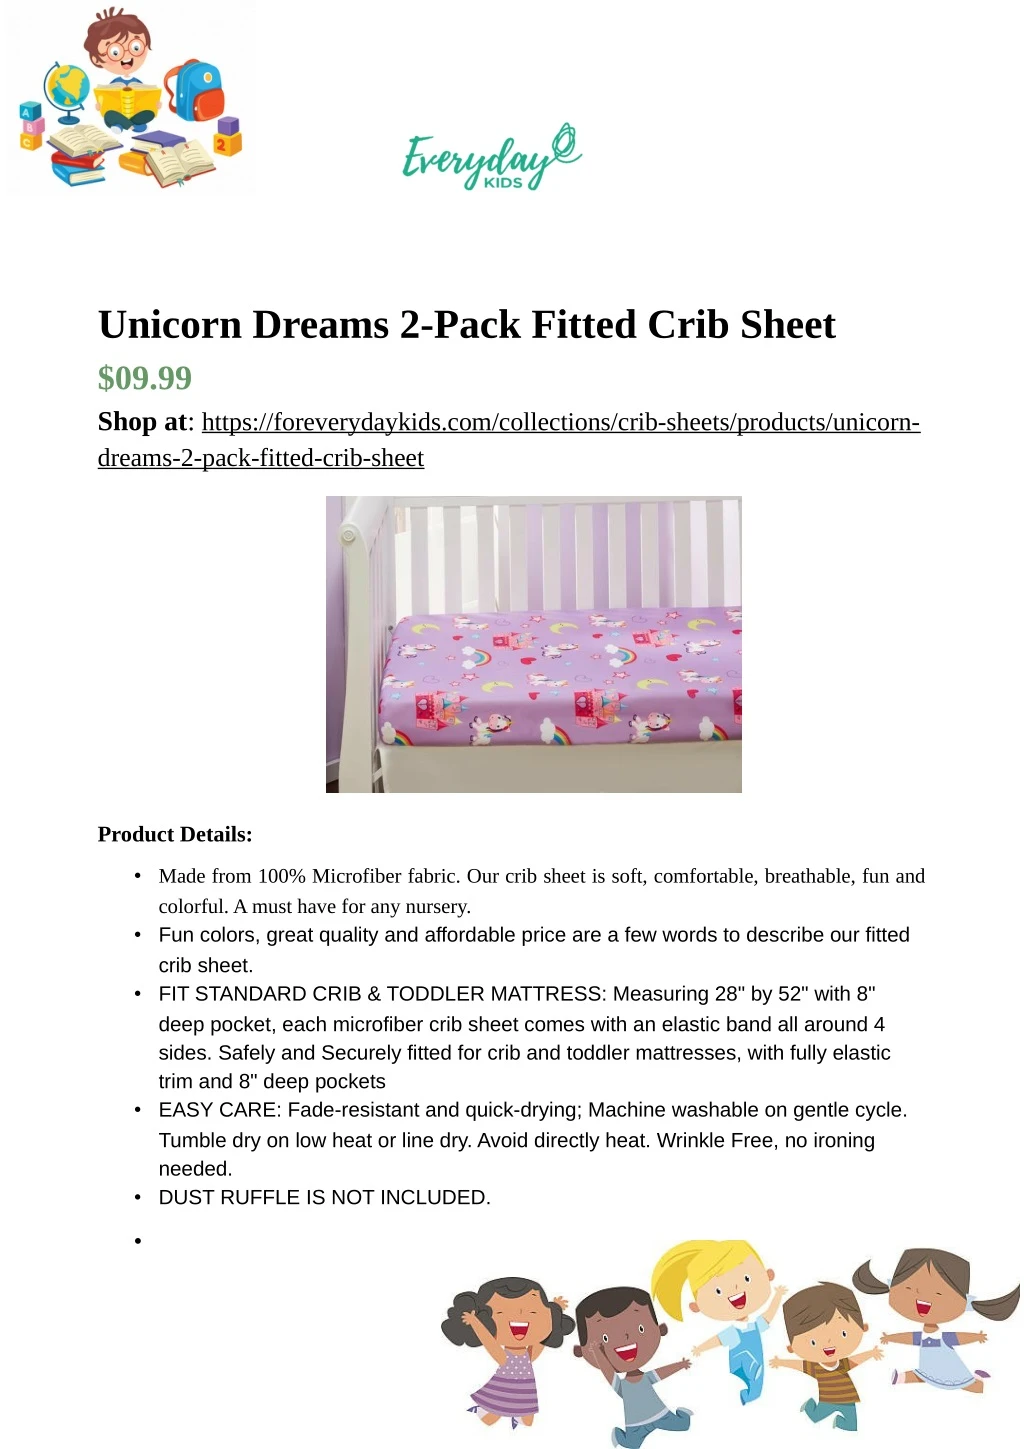 unicorn dreams 2 pack fitted crib sheet